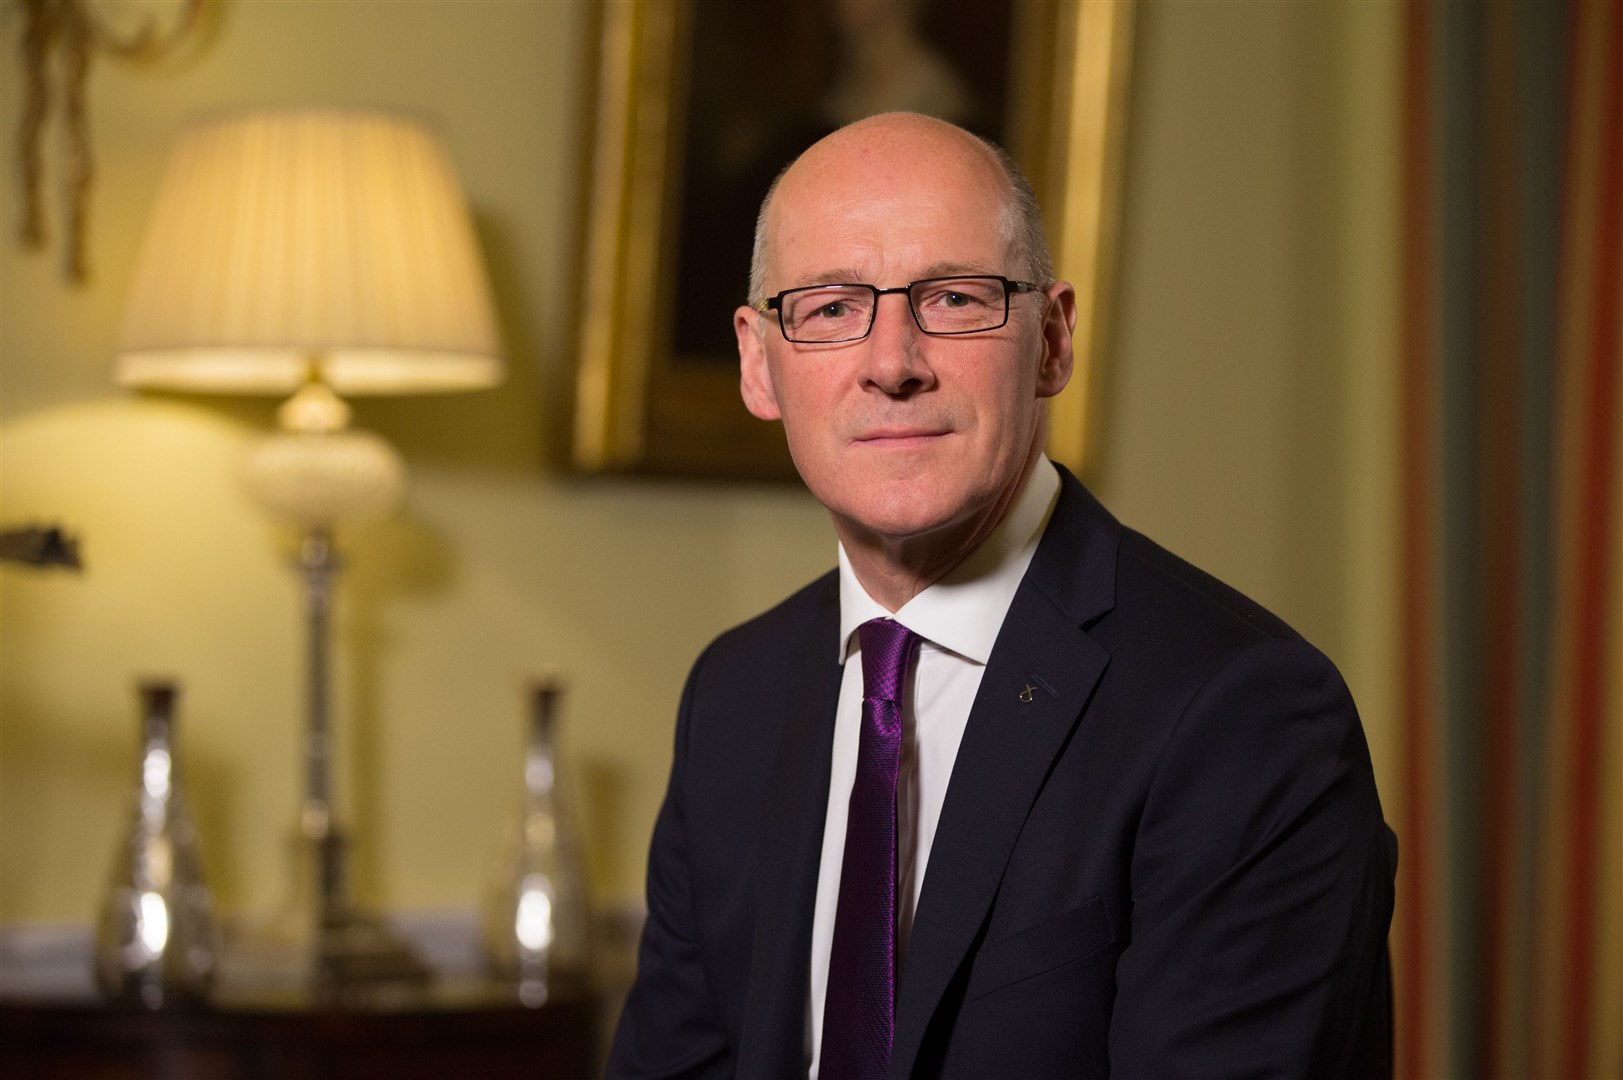 John Swinney: 'Our overriding priority is ensuring the health and wellbeing of our pupils and staff and giving parents the confidence schools are safe'.